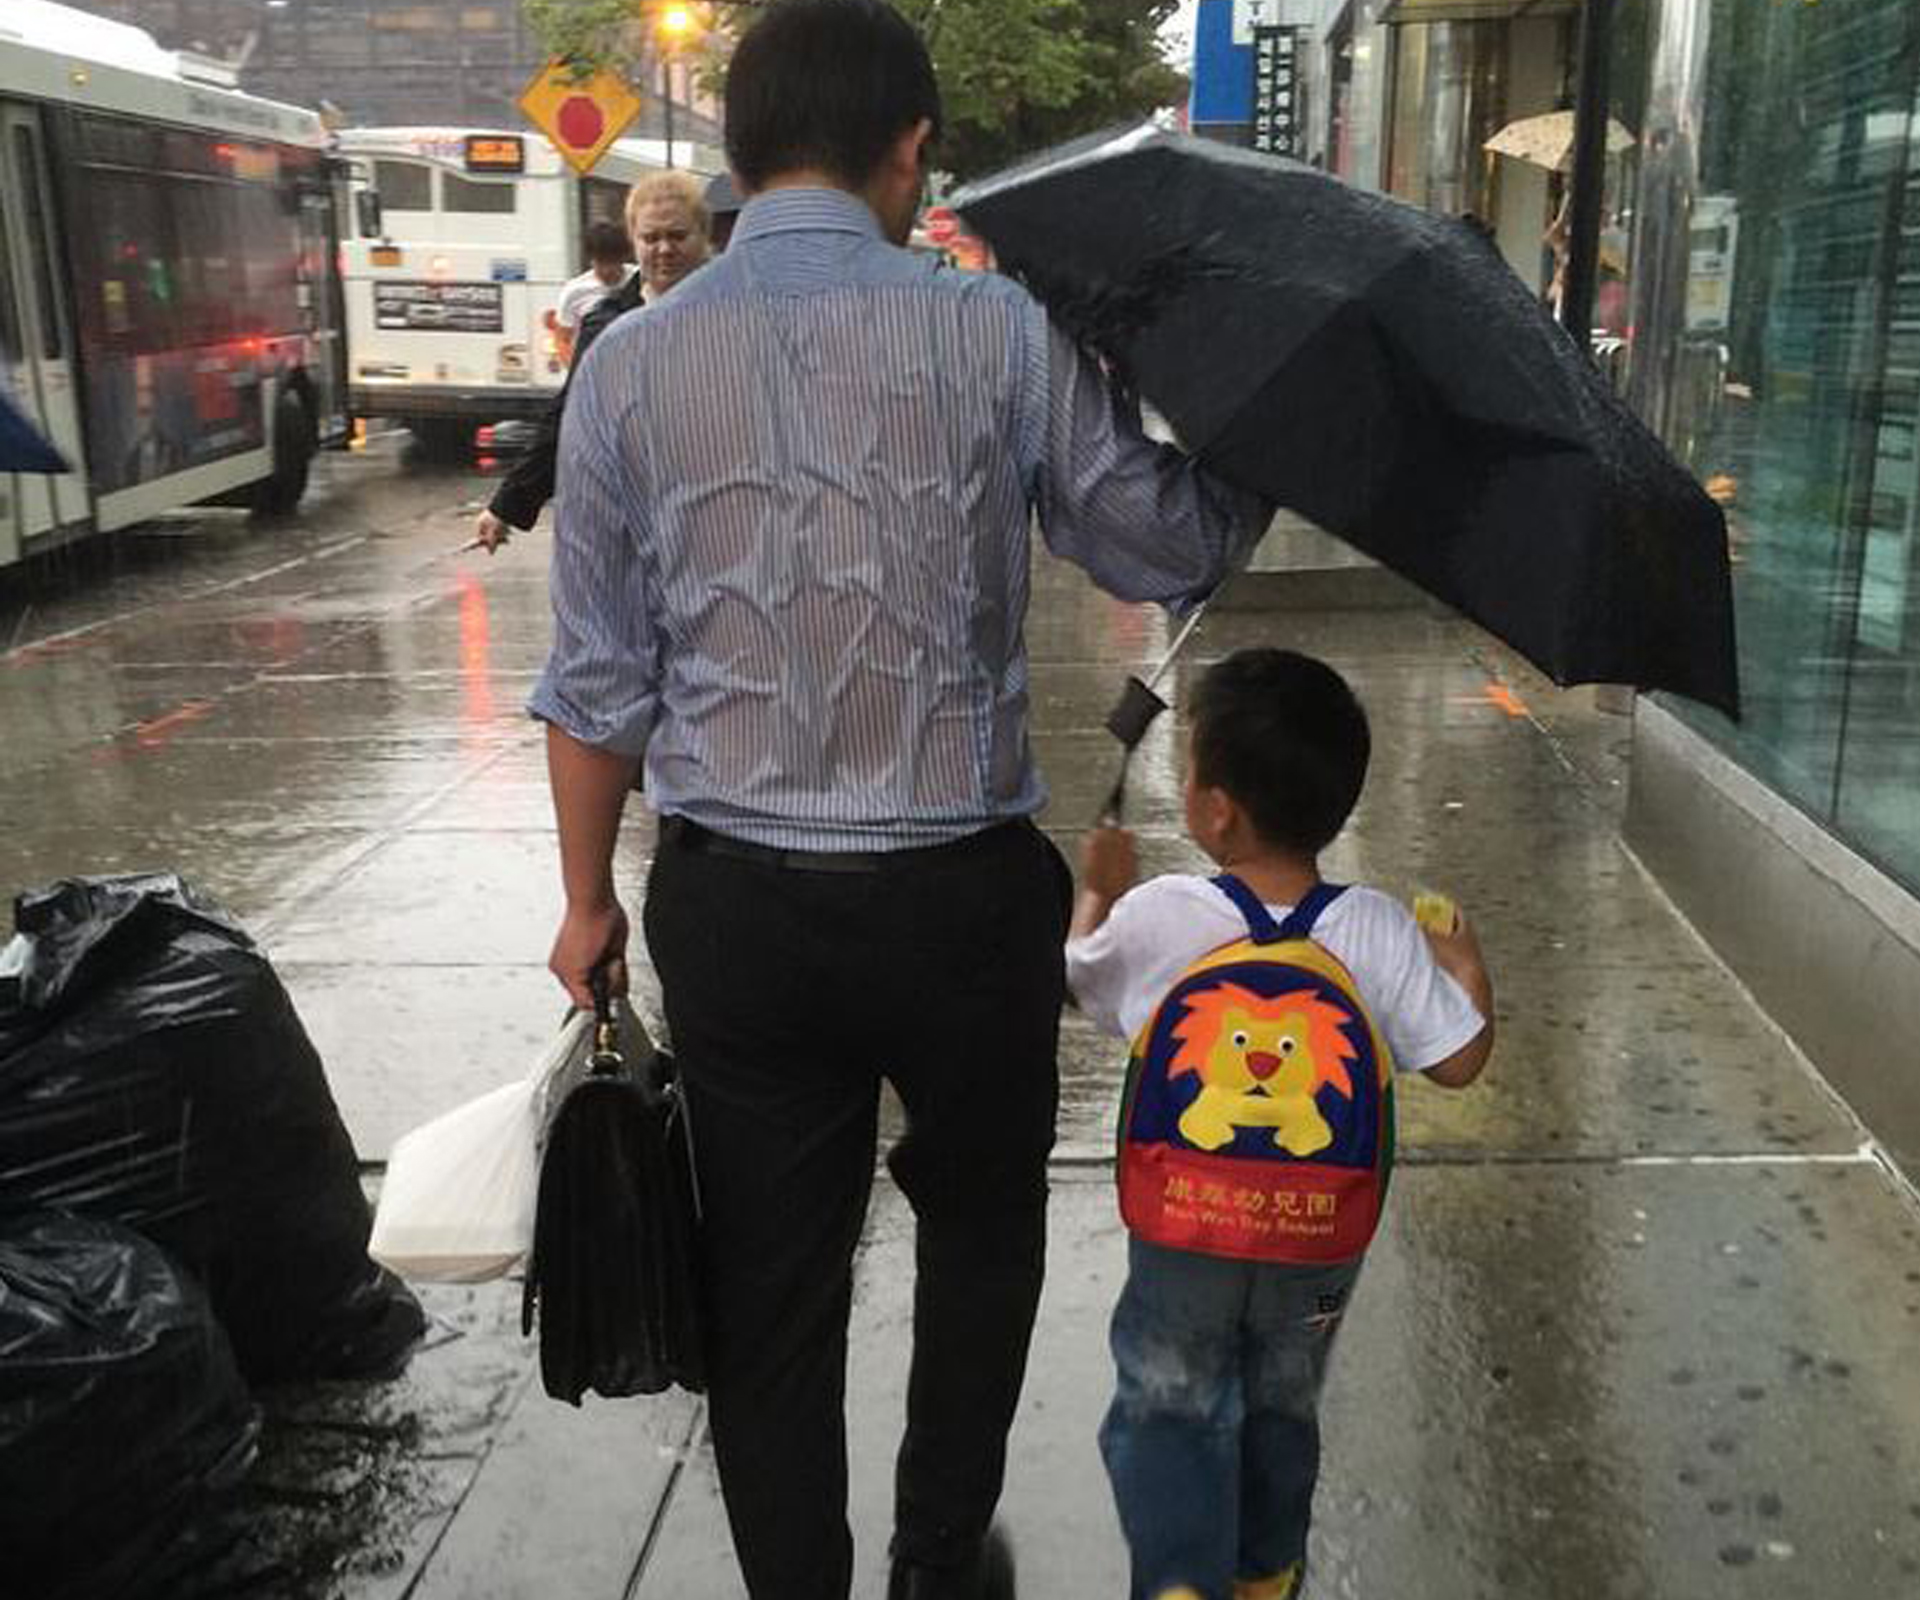 ‘Umbrella dad’ gets soaked to keep son dry